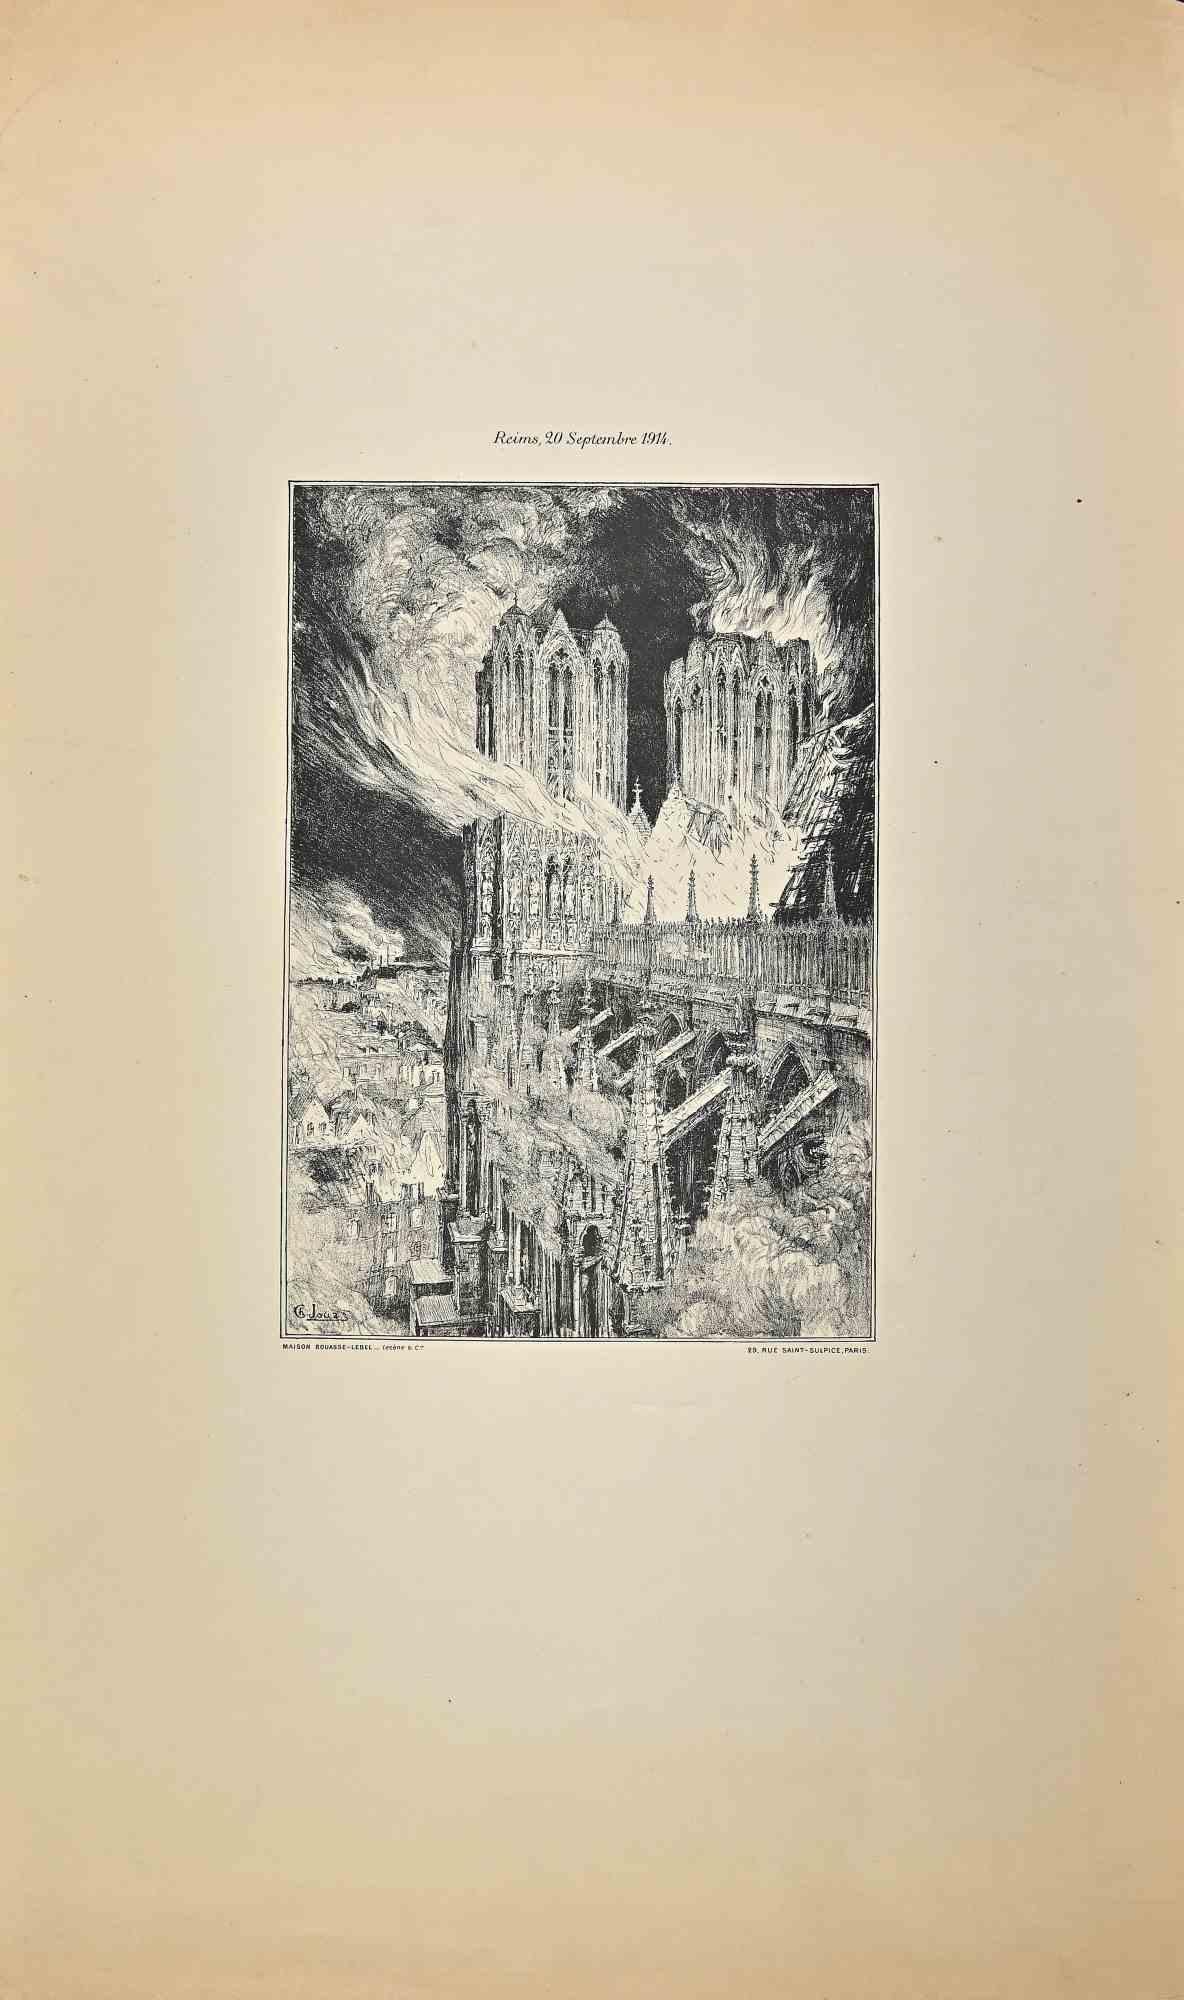 Charles jouas Landscape Print - Reims The Cathedral in Flames - Original Lithographby Charles Jouas - 1914